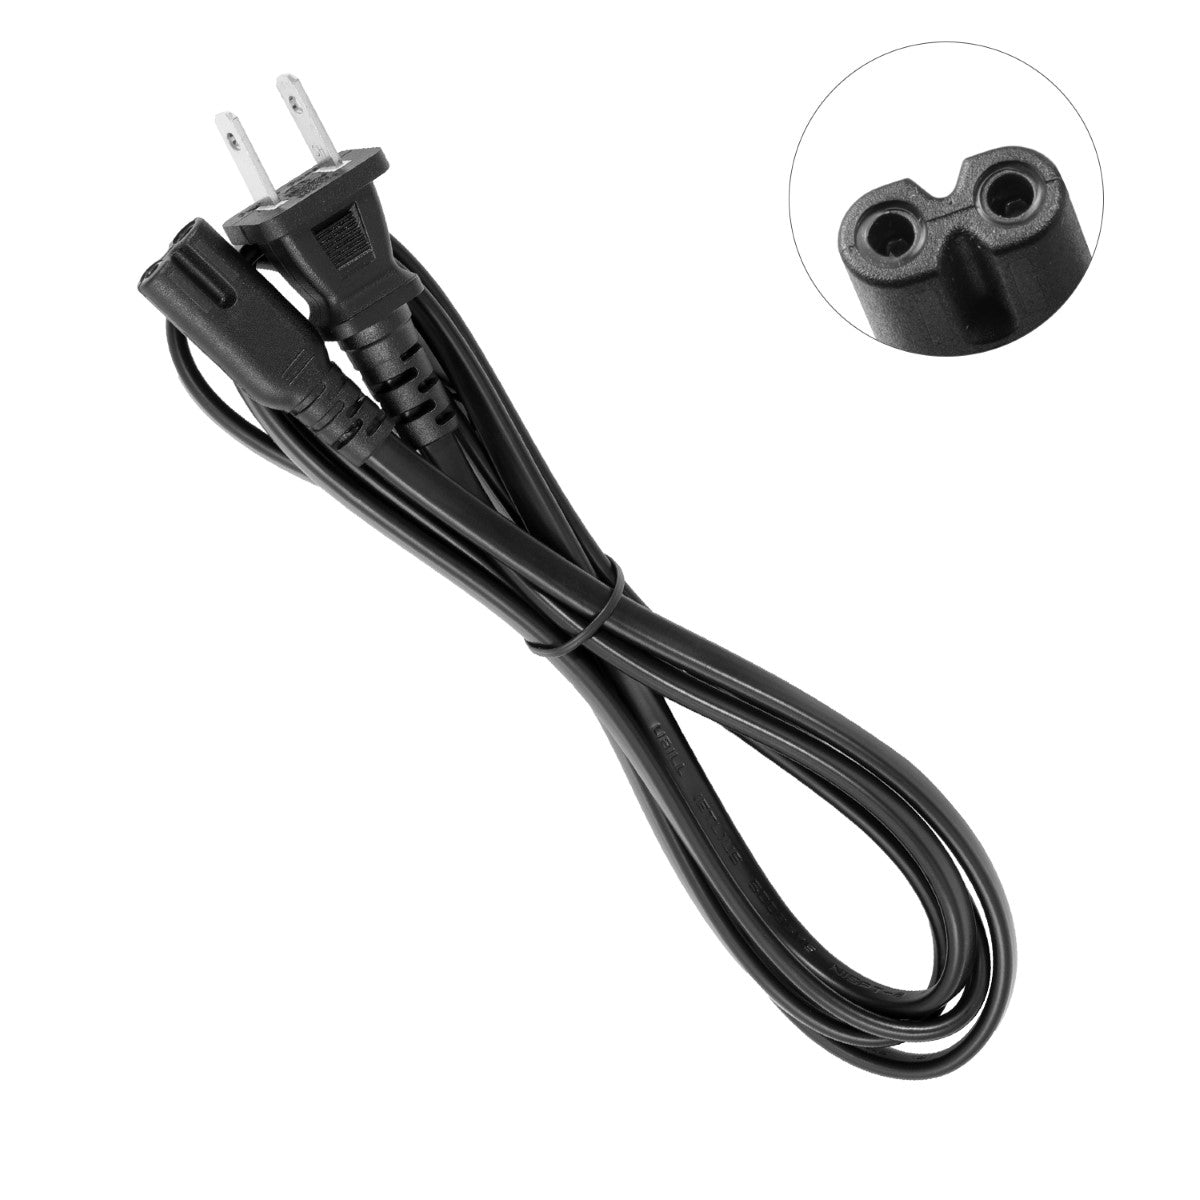 Power Cable for HP Officejet 3830 Printer.